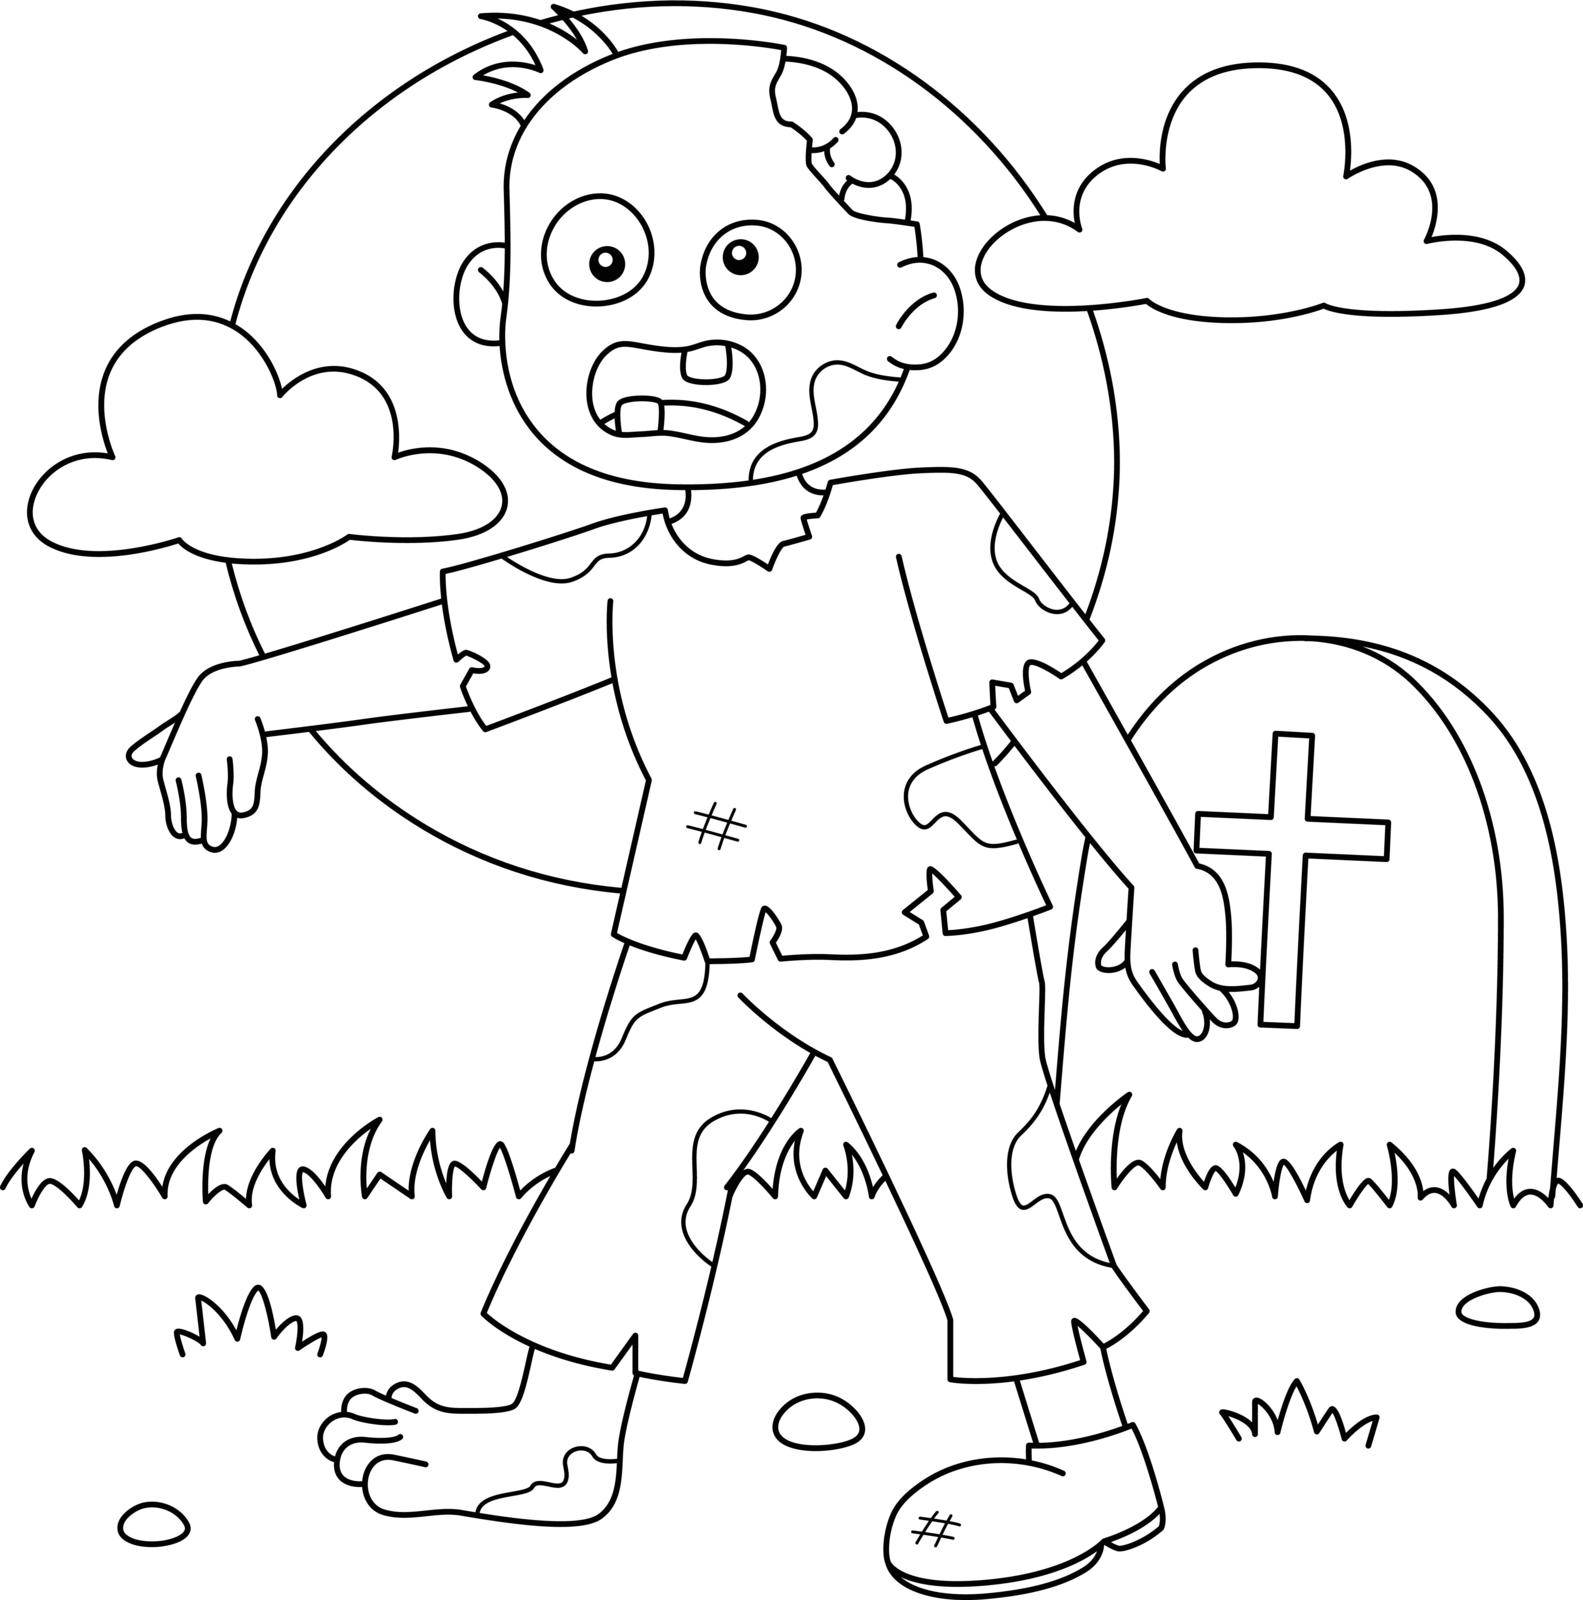 A cute and funny coloring page of a zombie Halloween. Provides hours of coloring fun for children. To color, this page is very easy. Suitable for little kids and toddlers.